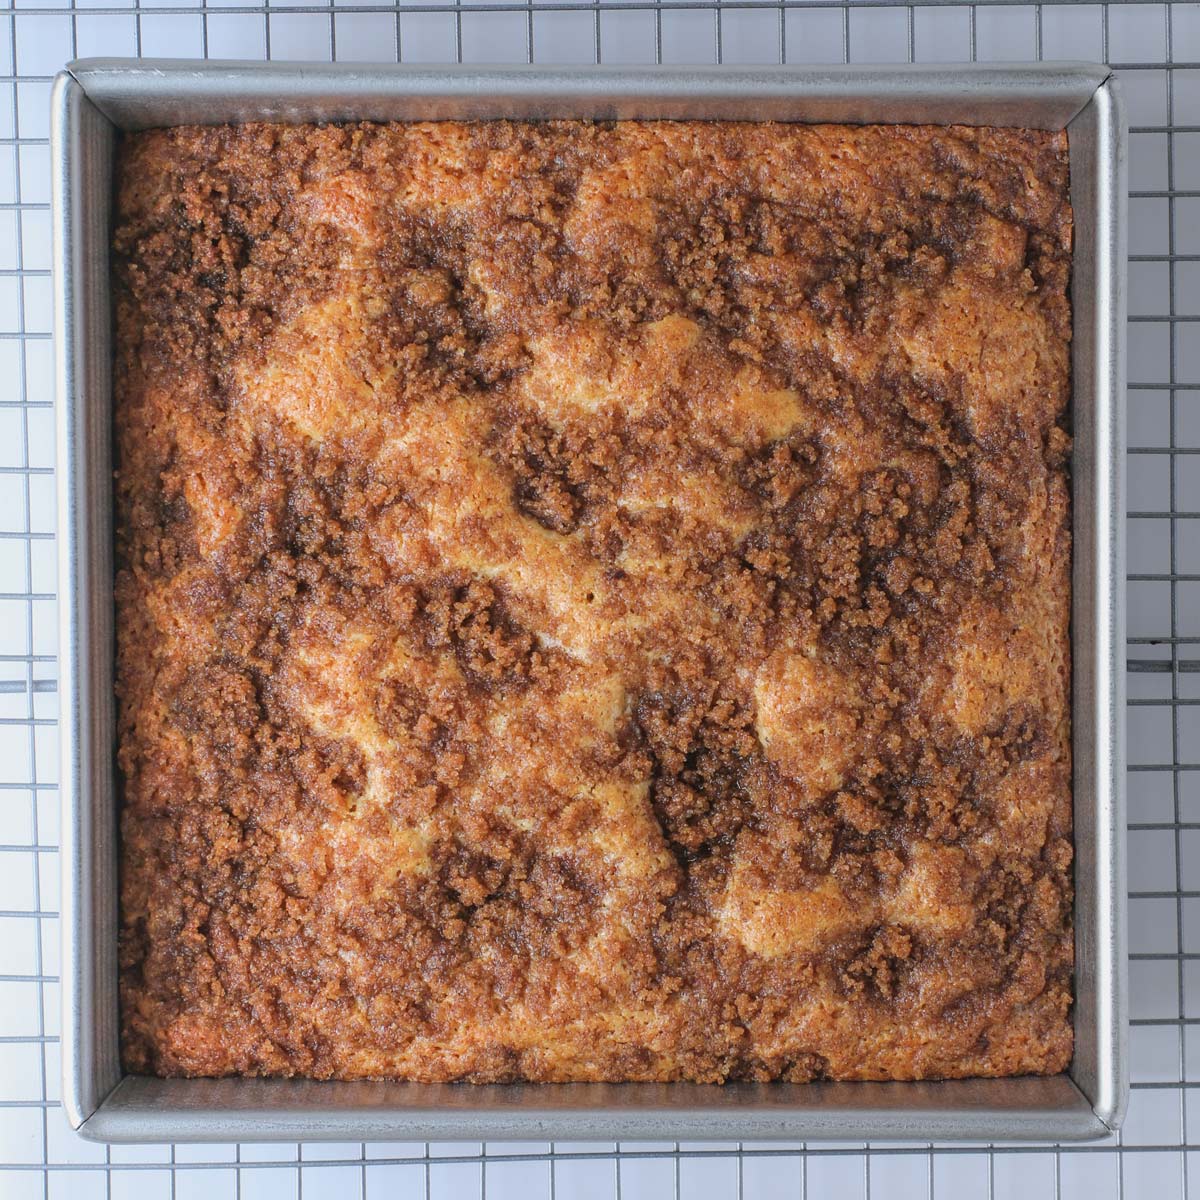 baked cinnamon coffee cake cooling on a wire rack.